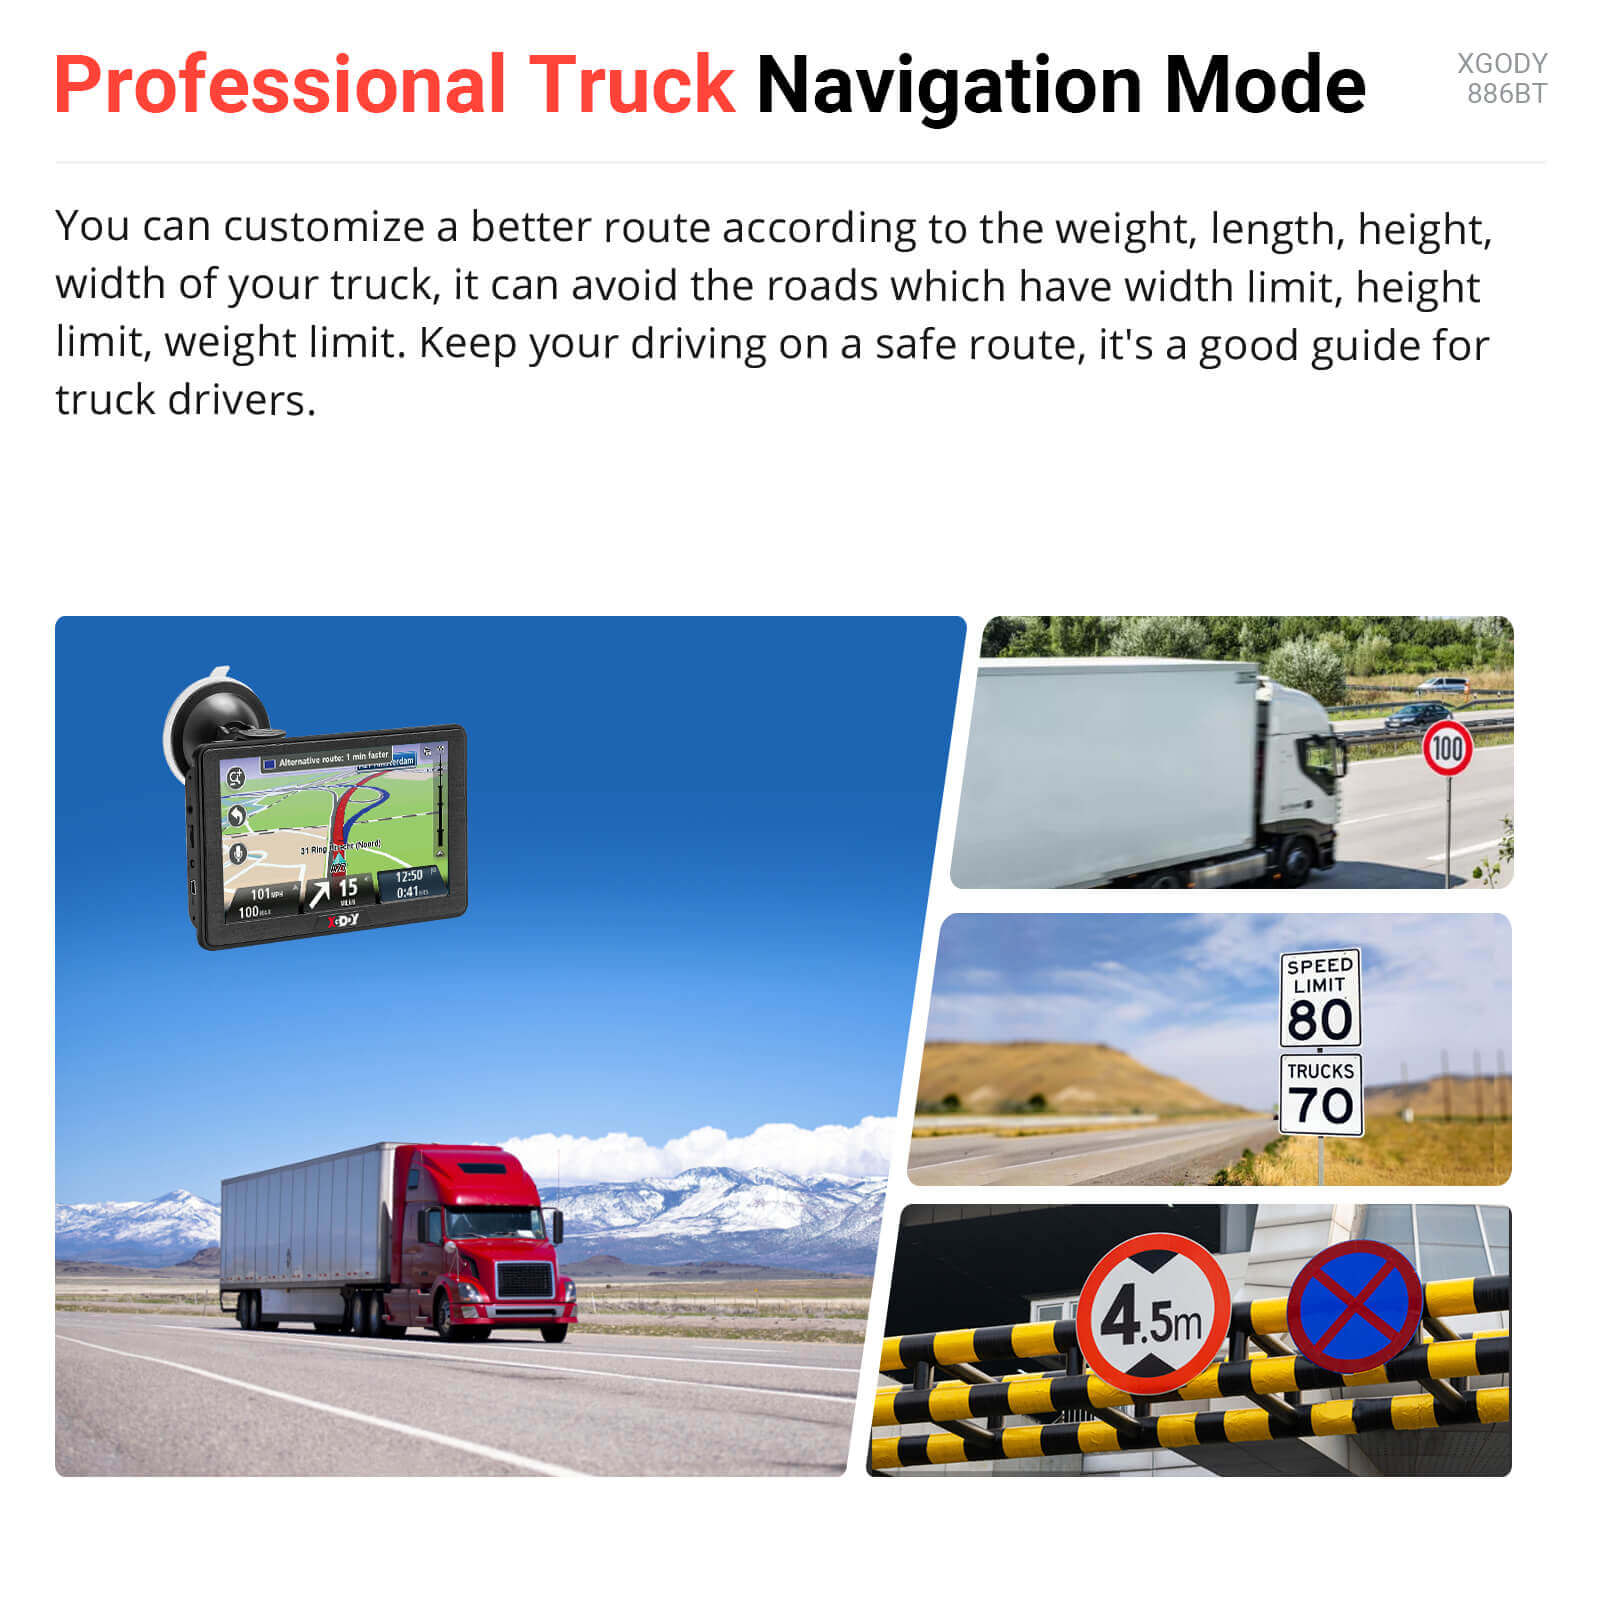 XGODY 886BT | 7-inch GPS Truck Navigator, Easy Raed Touchscreen Display, Custom Routing and Dock Guidance